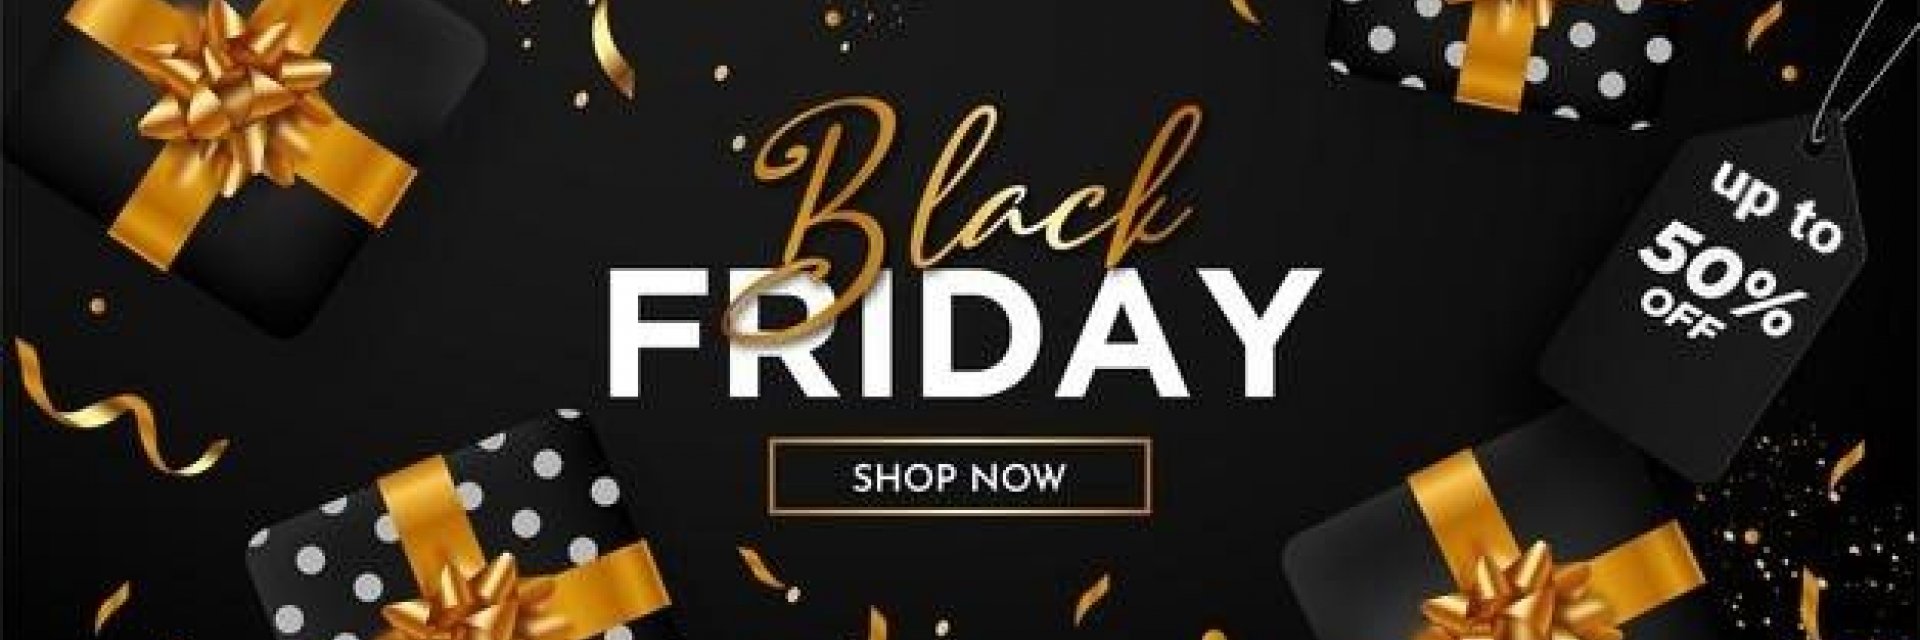 black-friday-super-sale-background-with-gift-composition-1361-3554